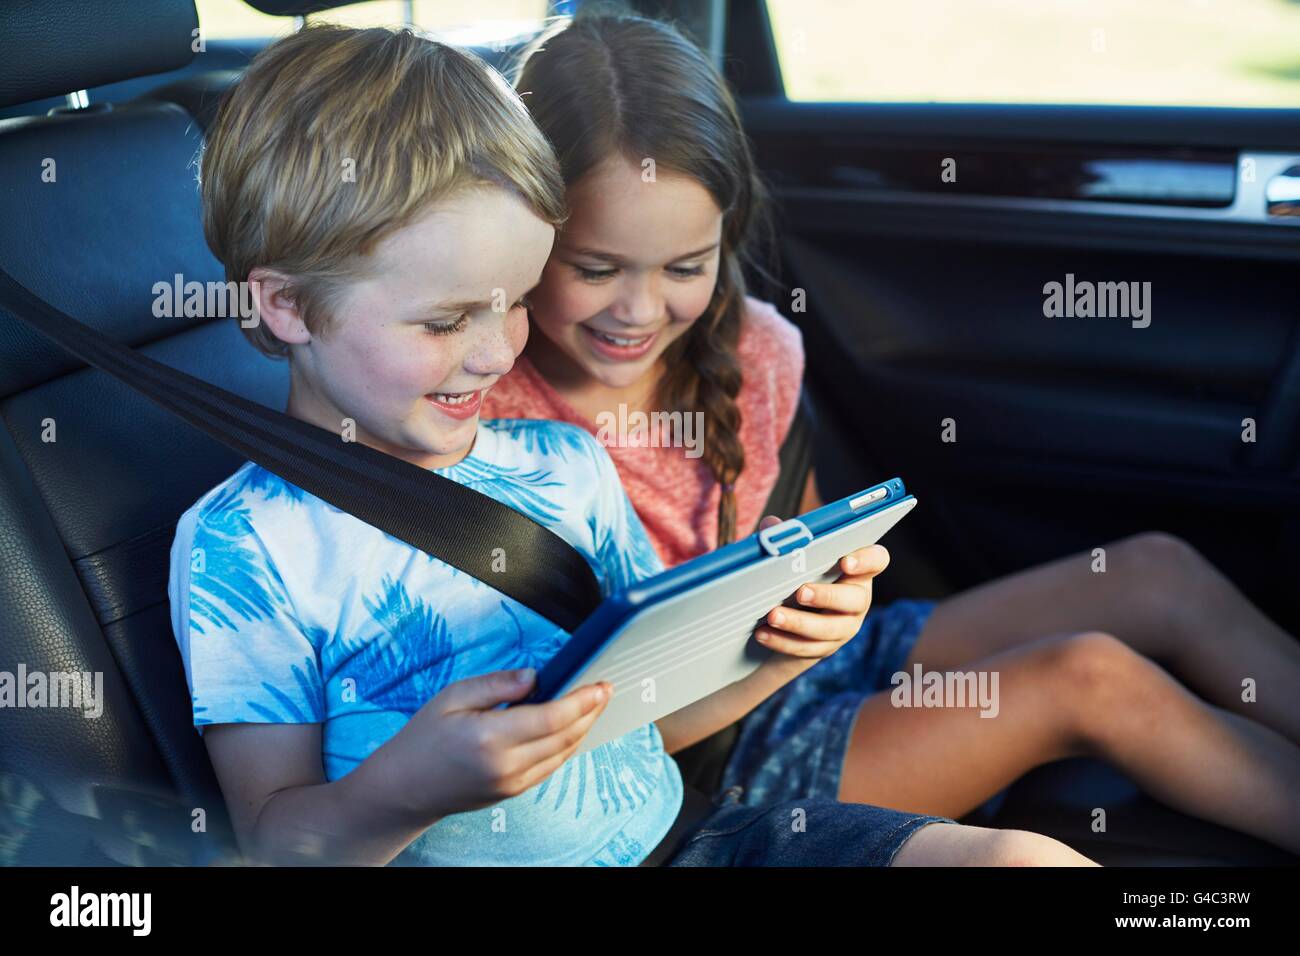 MODEL RELEASED. Brother and sister in the back seat of the car wearing seat belts, using a digital tablet. Stock Photo